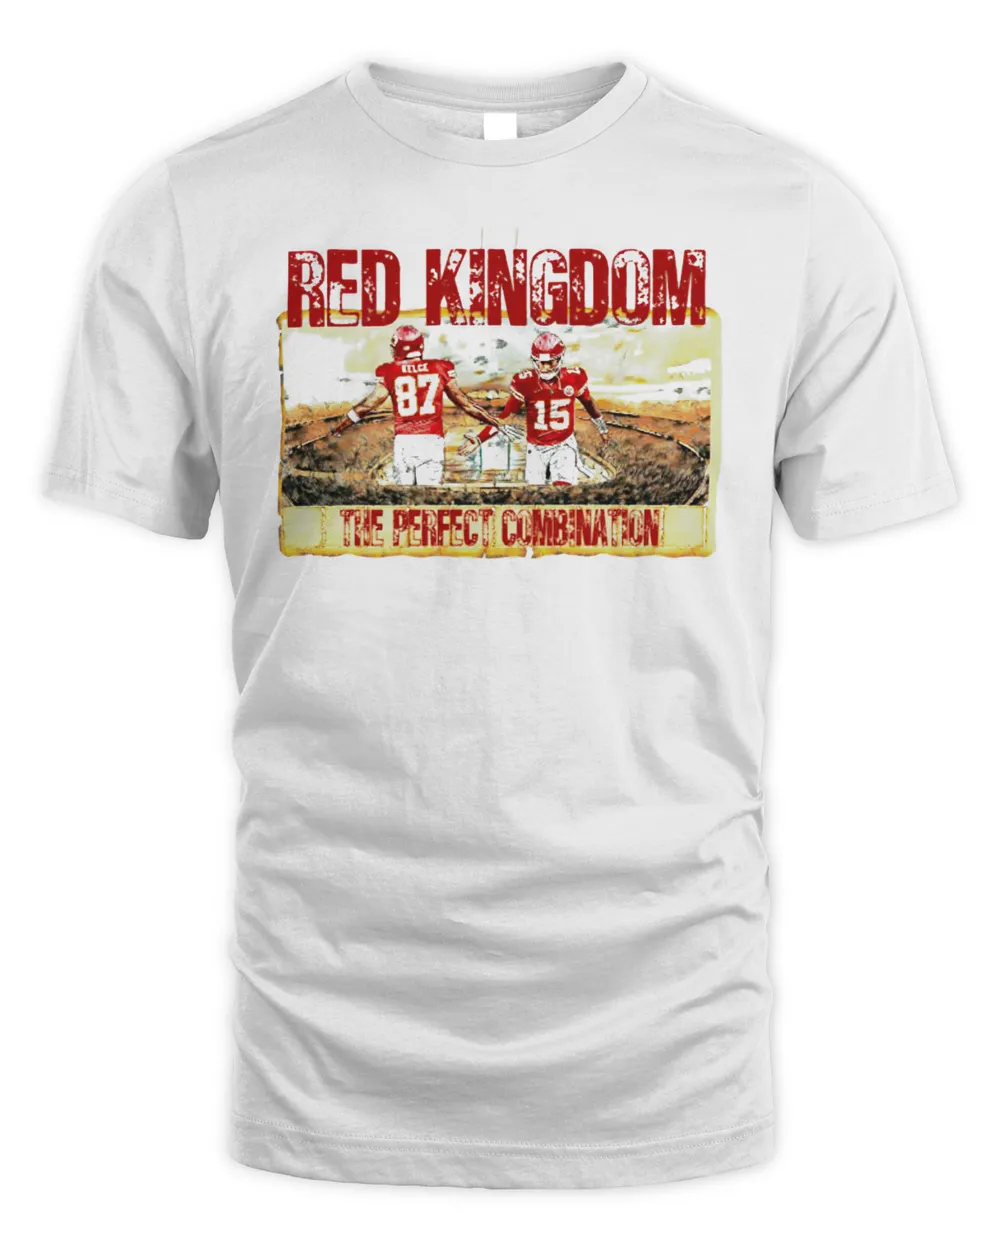 Kelce and Mahomes red kingdom the perfect combination shirt